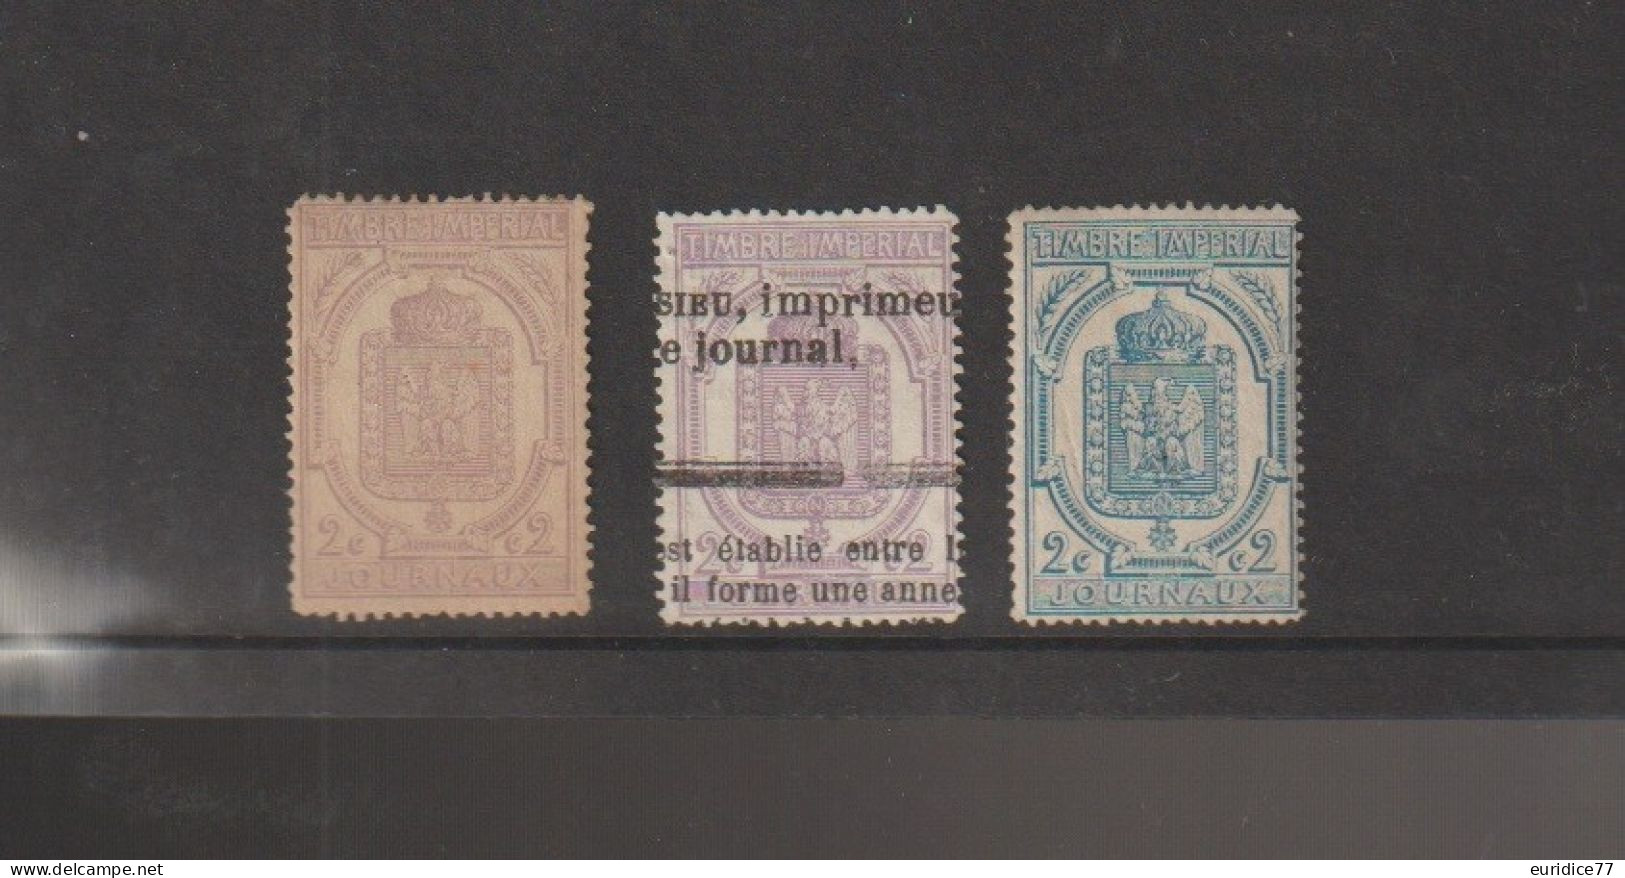 France 1869 - Timbre Imperial Journaux * - Journaux